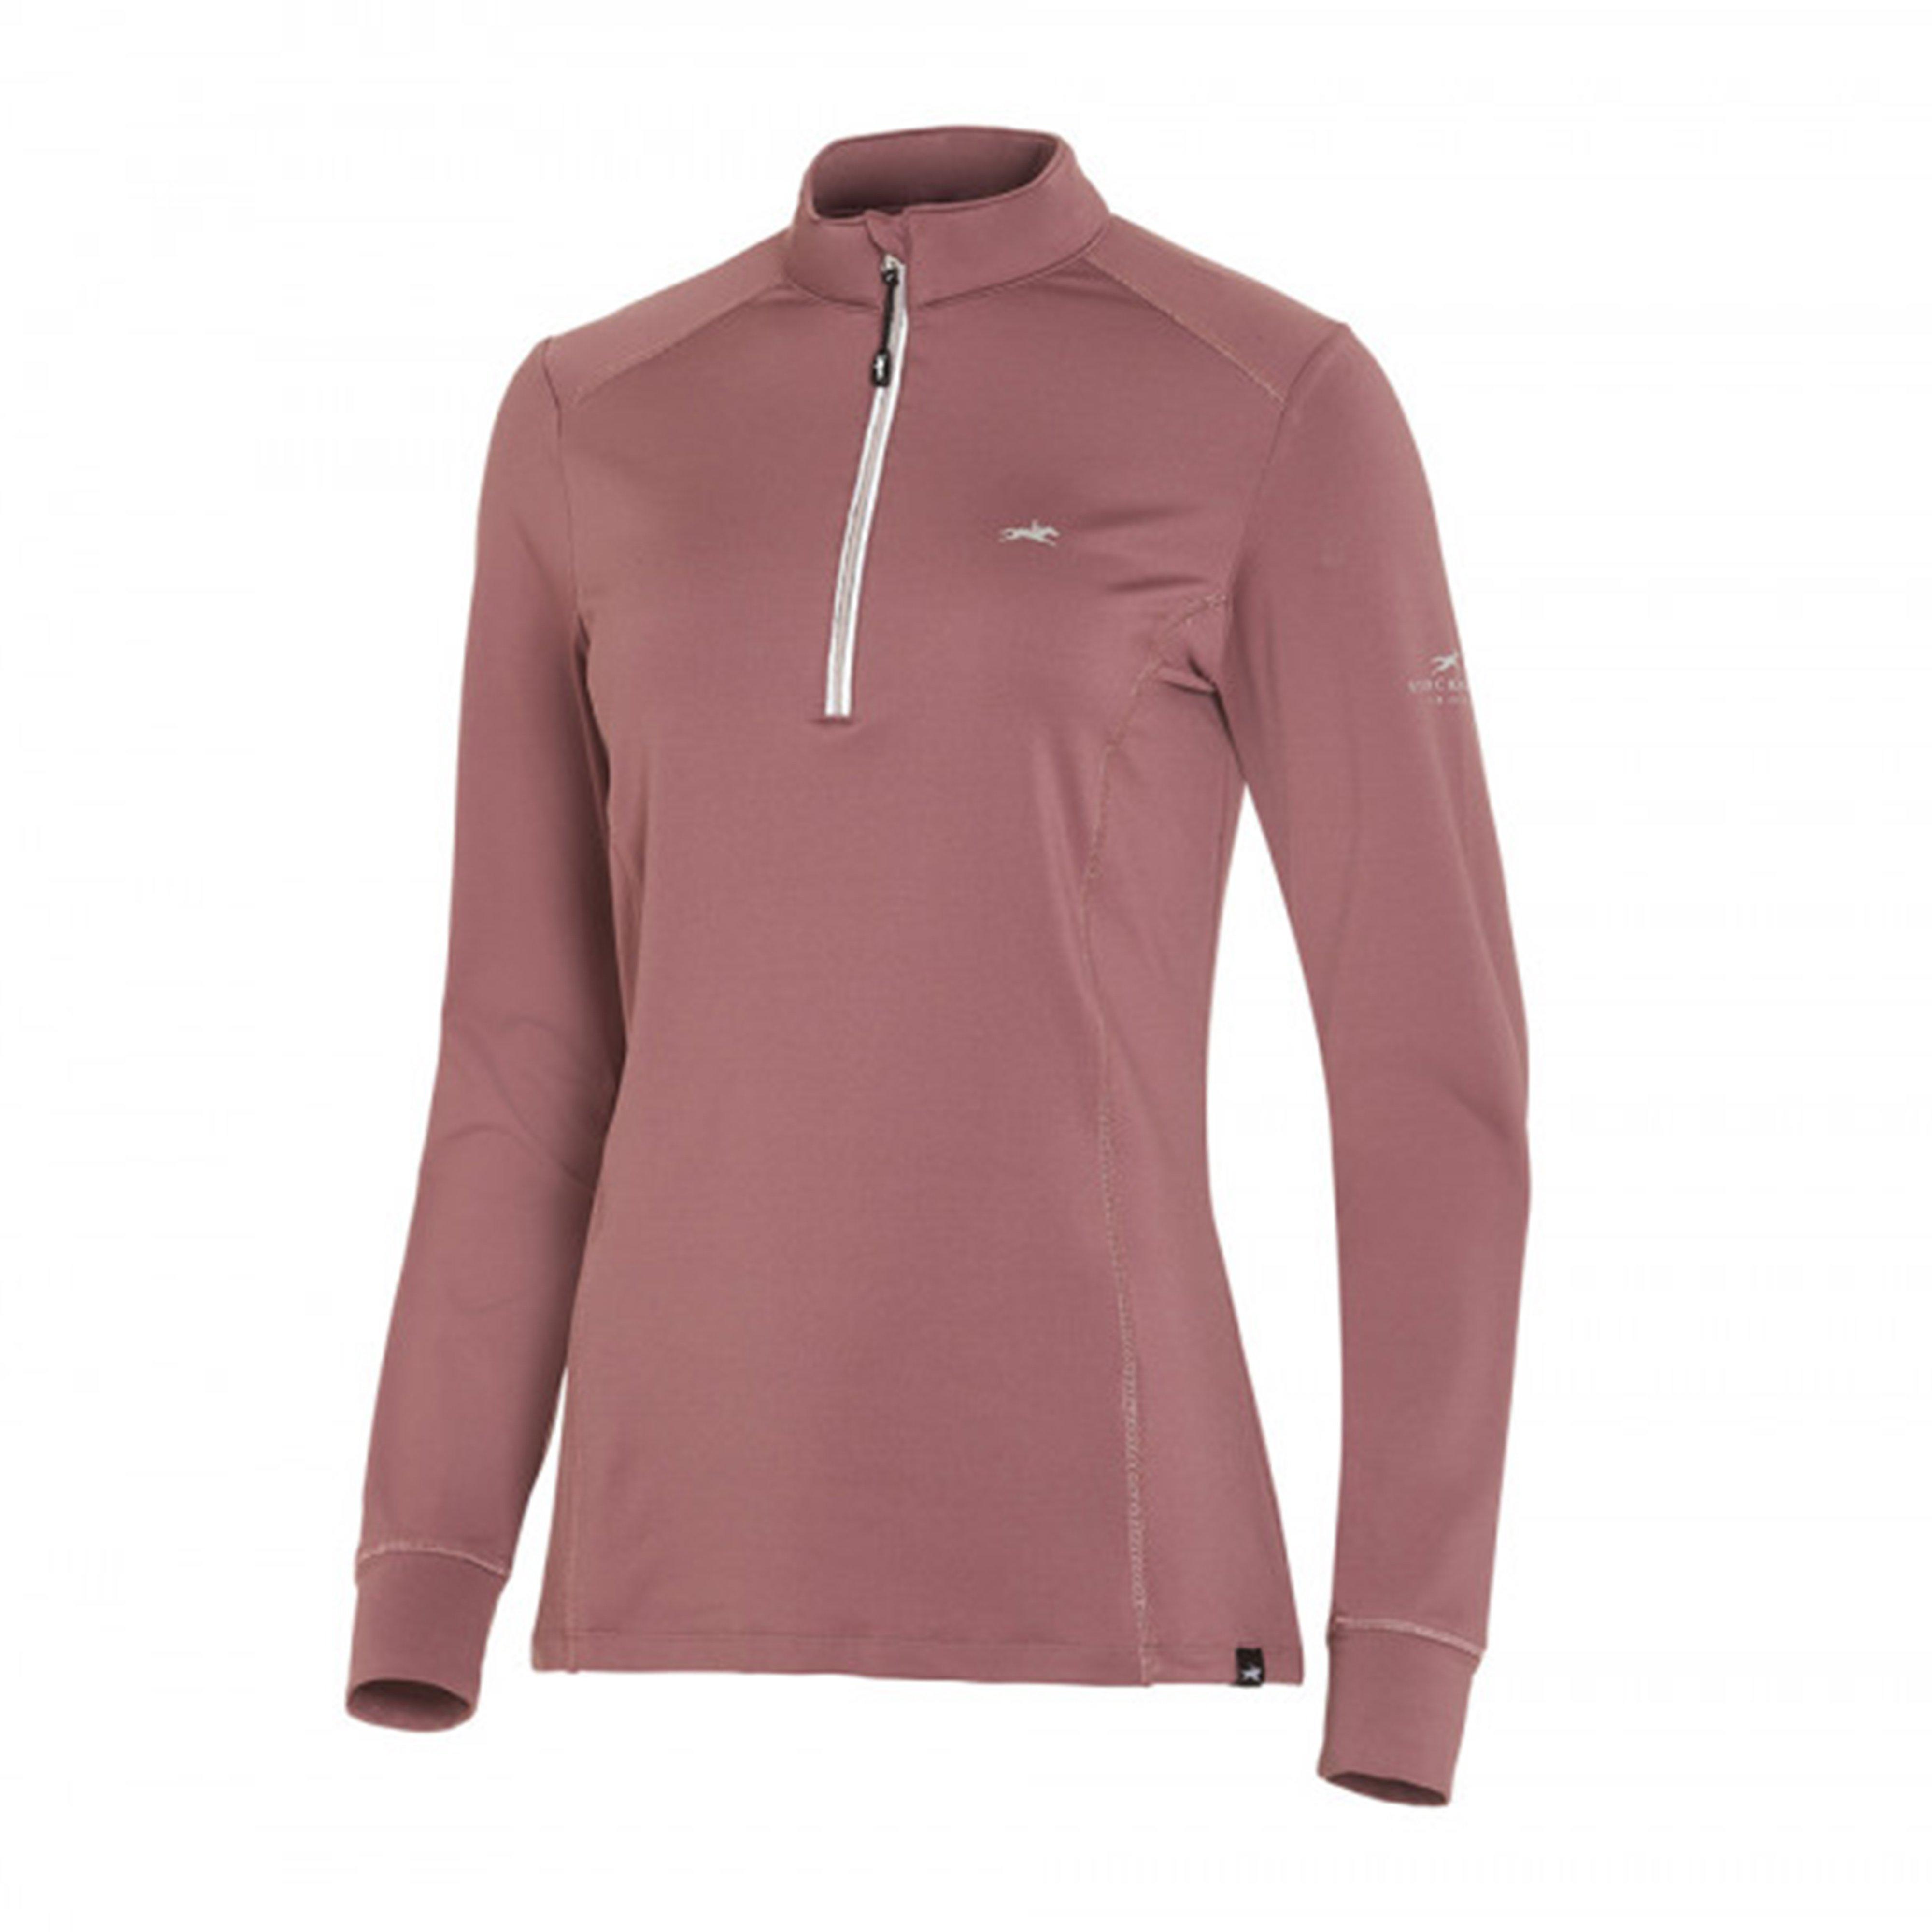 Womens Winter Page. SP Quarter Zip Training Shirt Rose Taupe